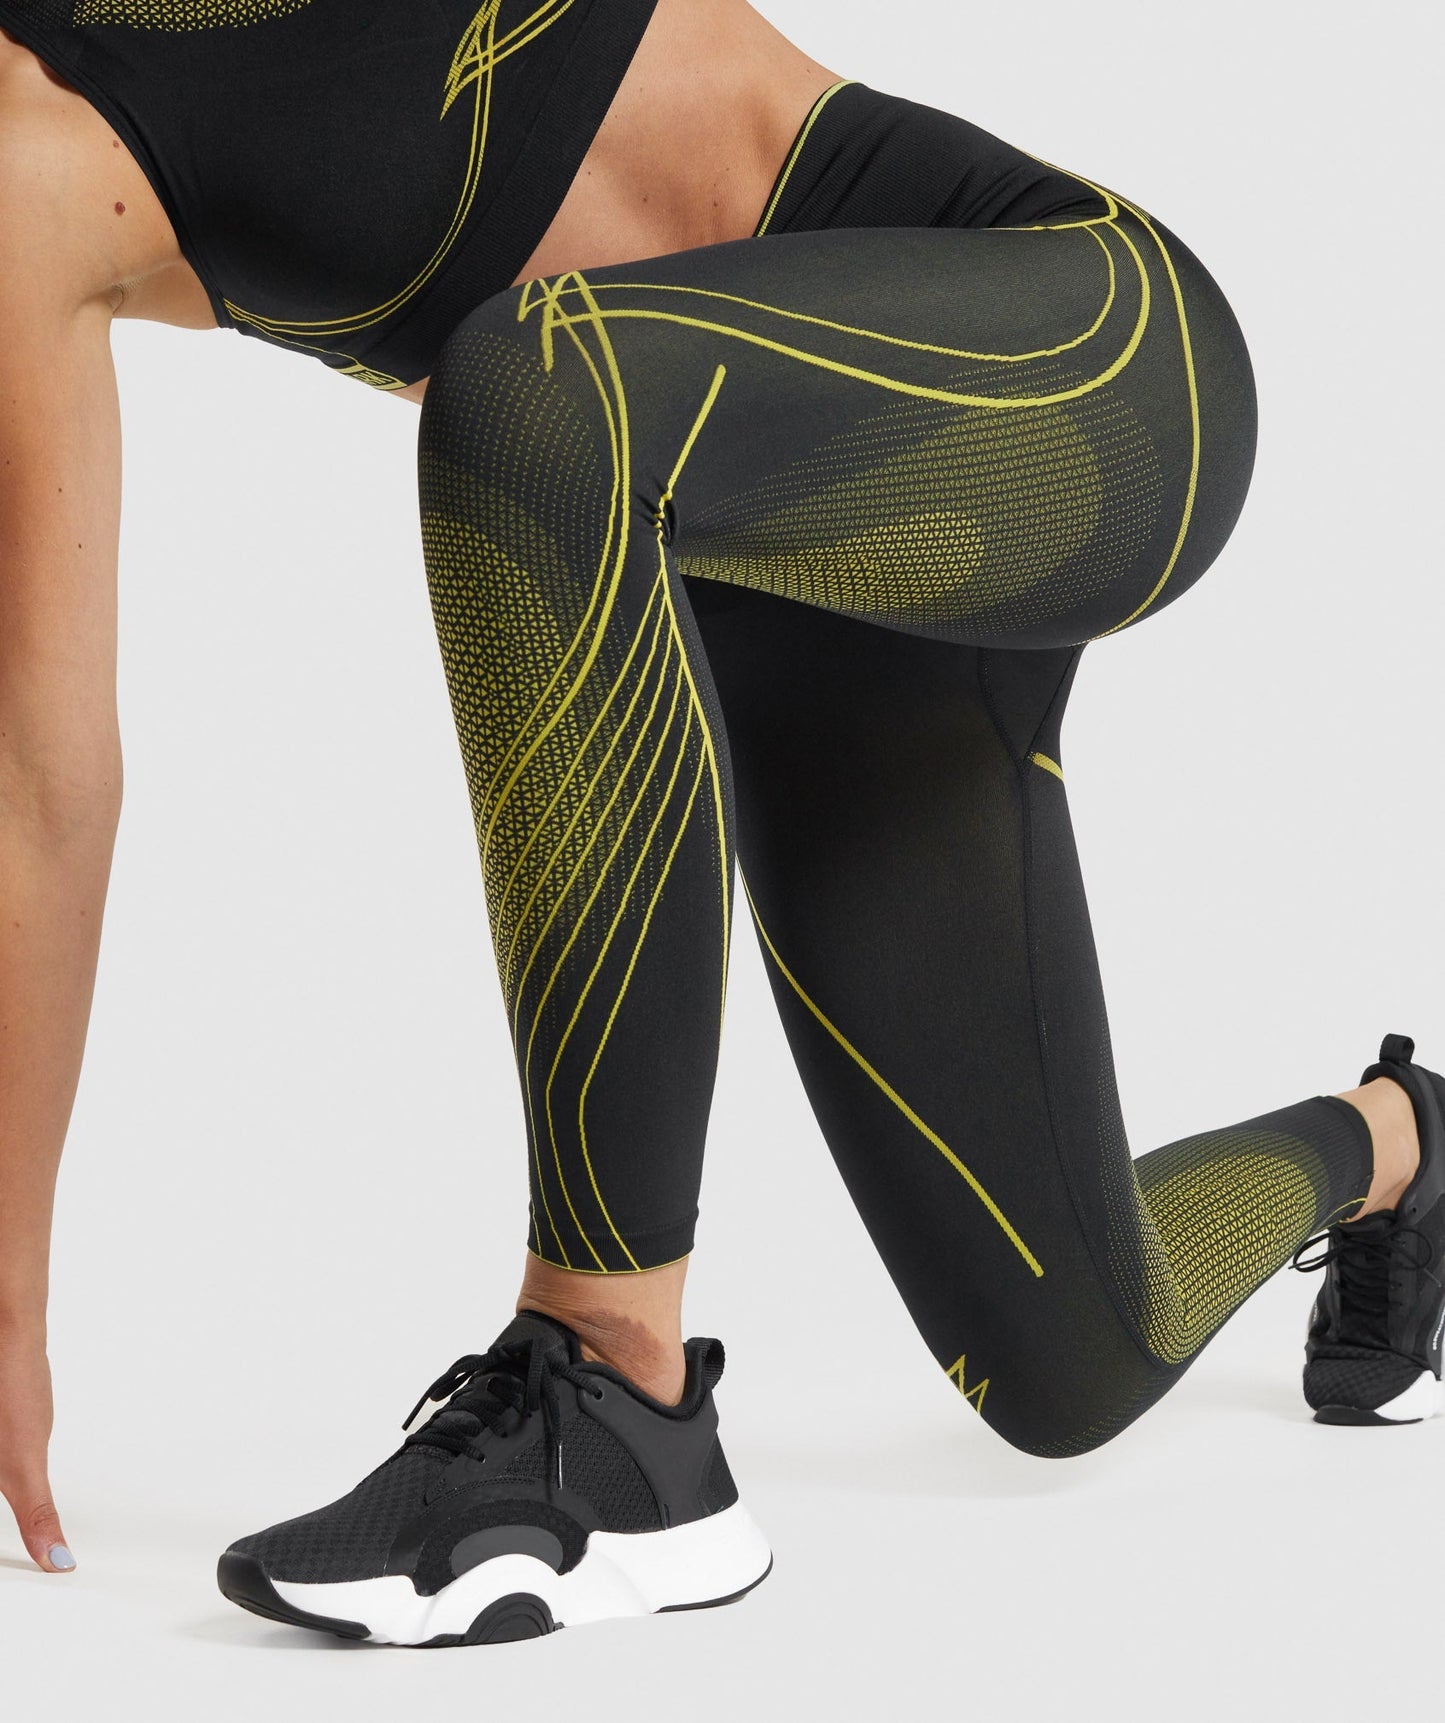 Gymshark Apex Seamless High Rise Leggings - Black/Yellow – Client 446 100K  products